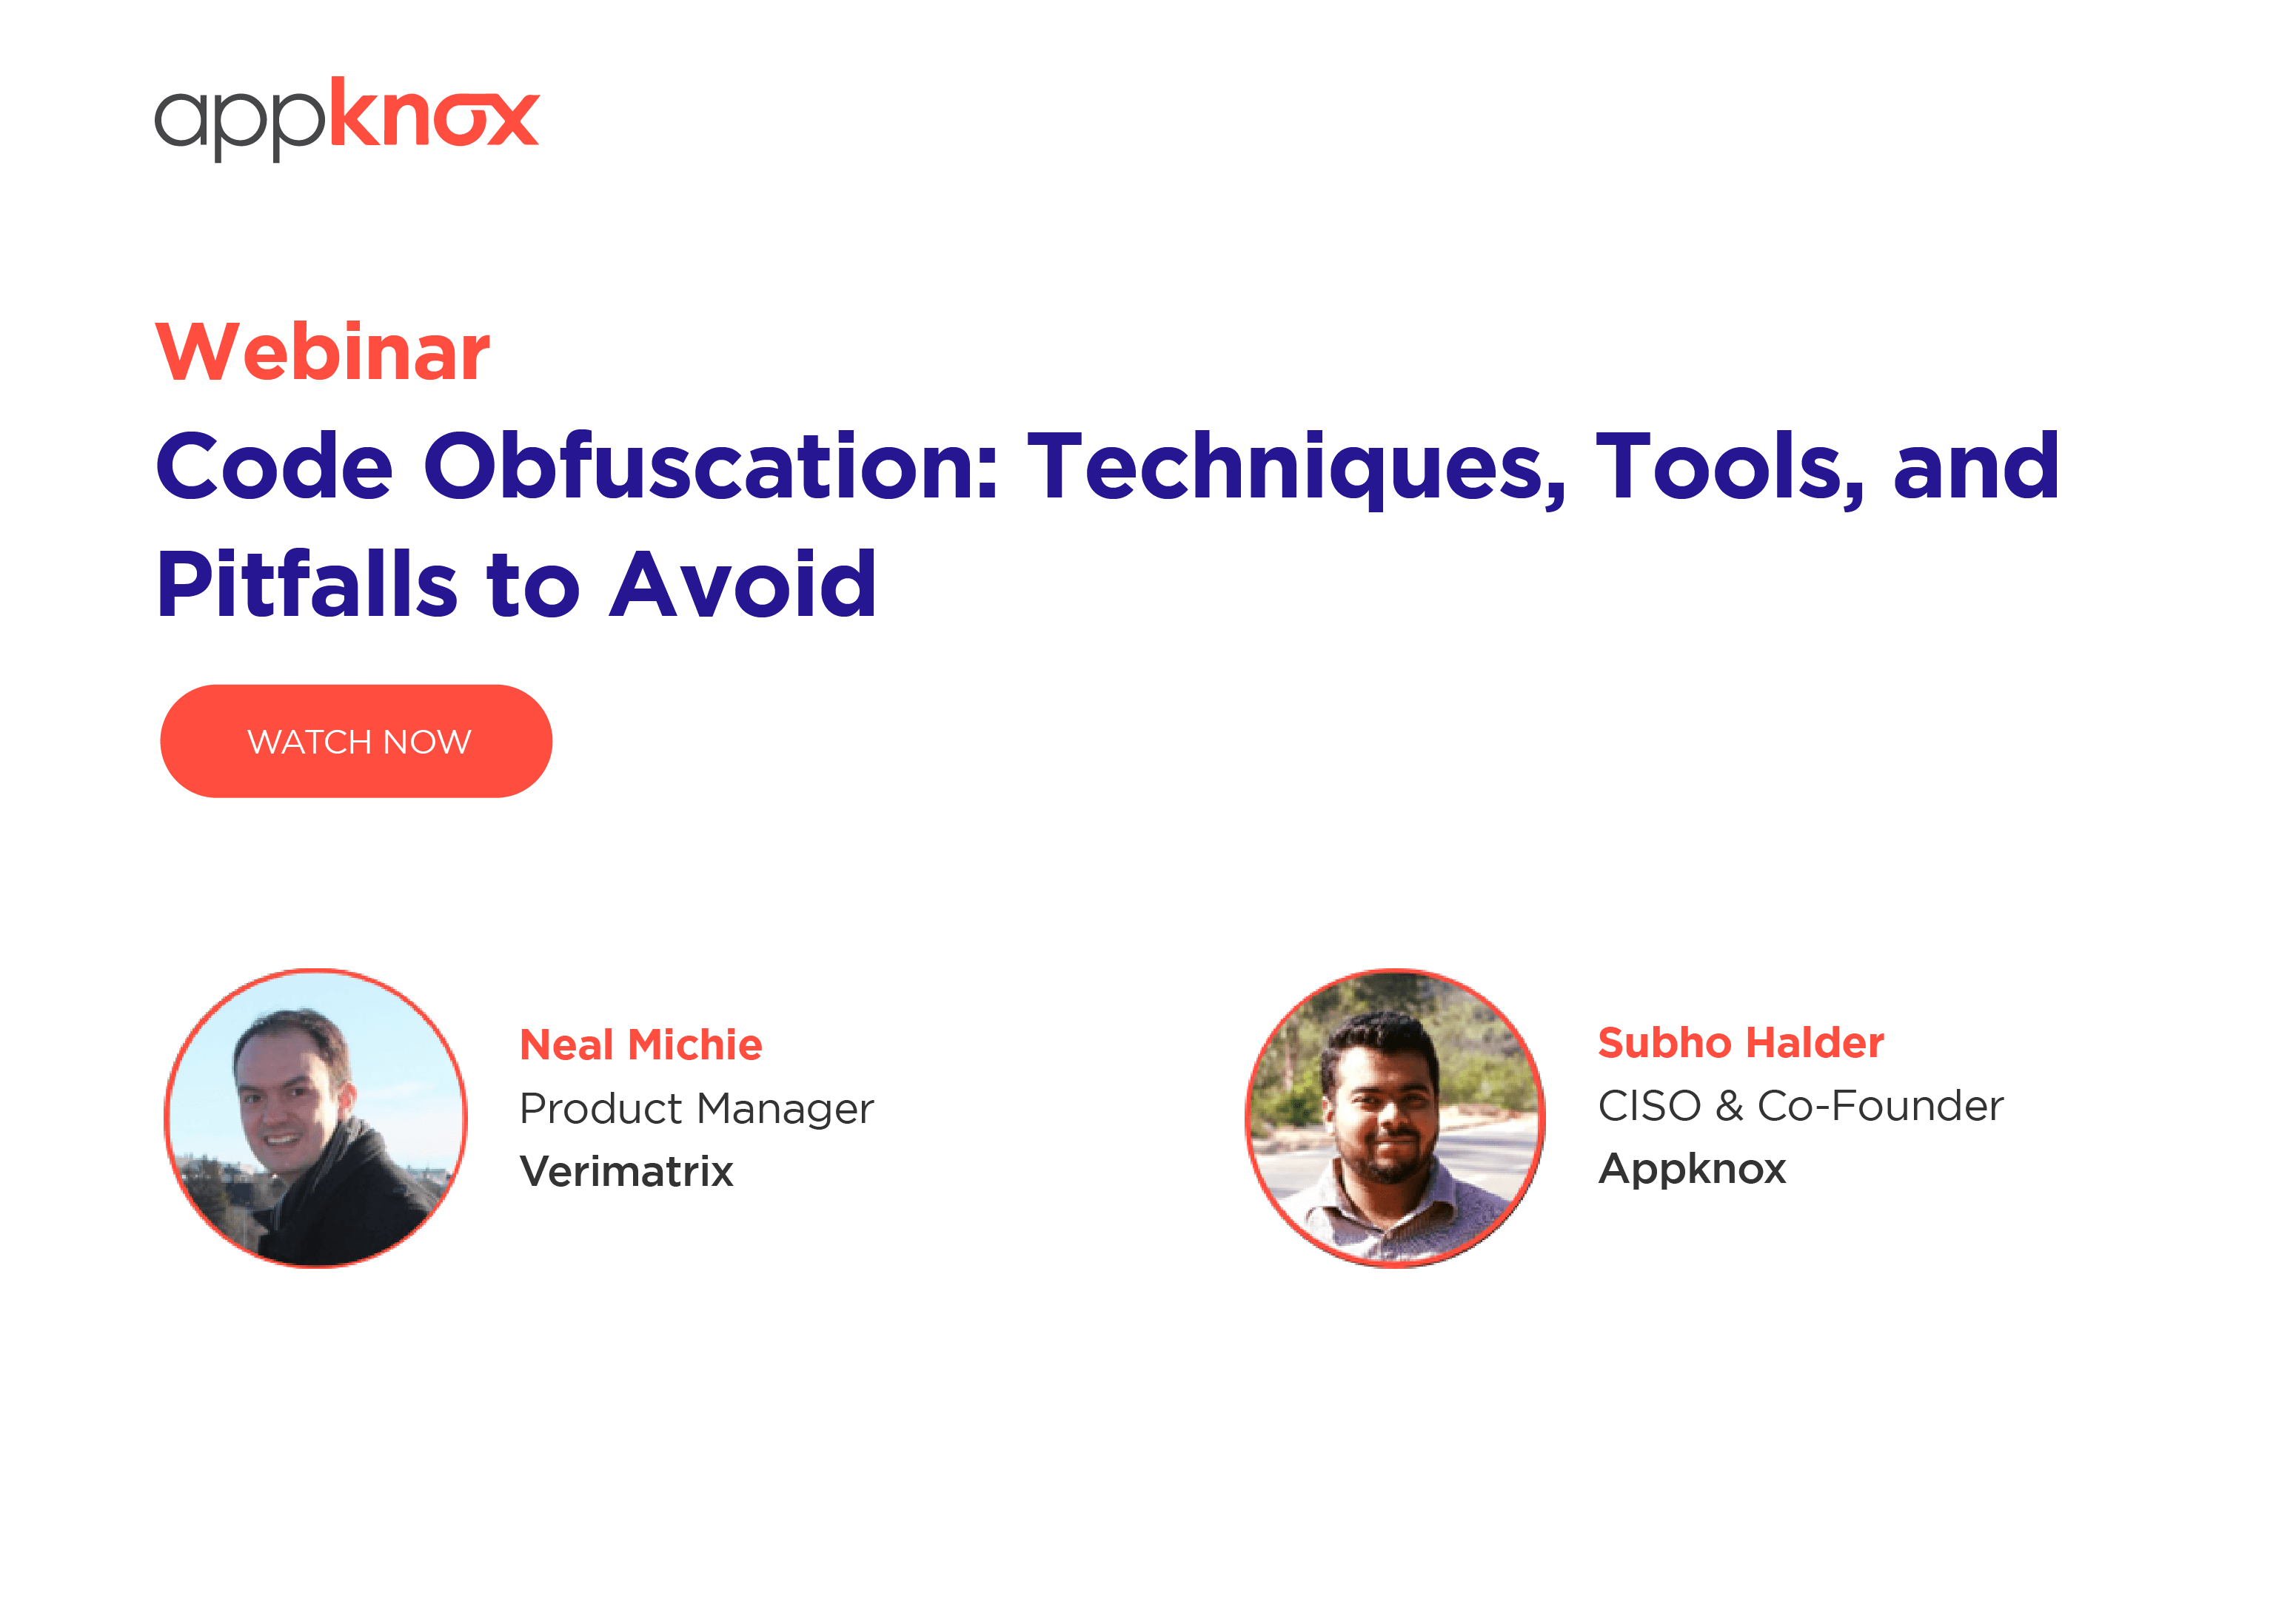 WEBINAR - Code Obfuscation- Techniques, Tools, and Pitfalls to Avoid